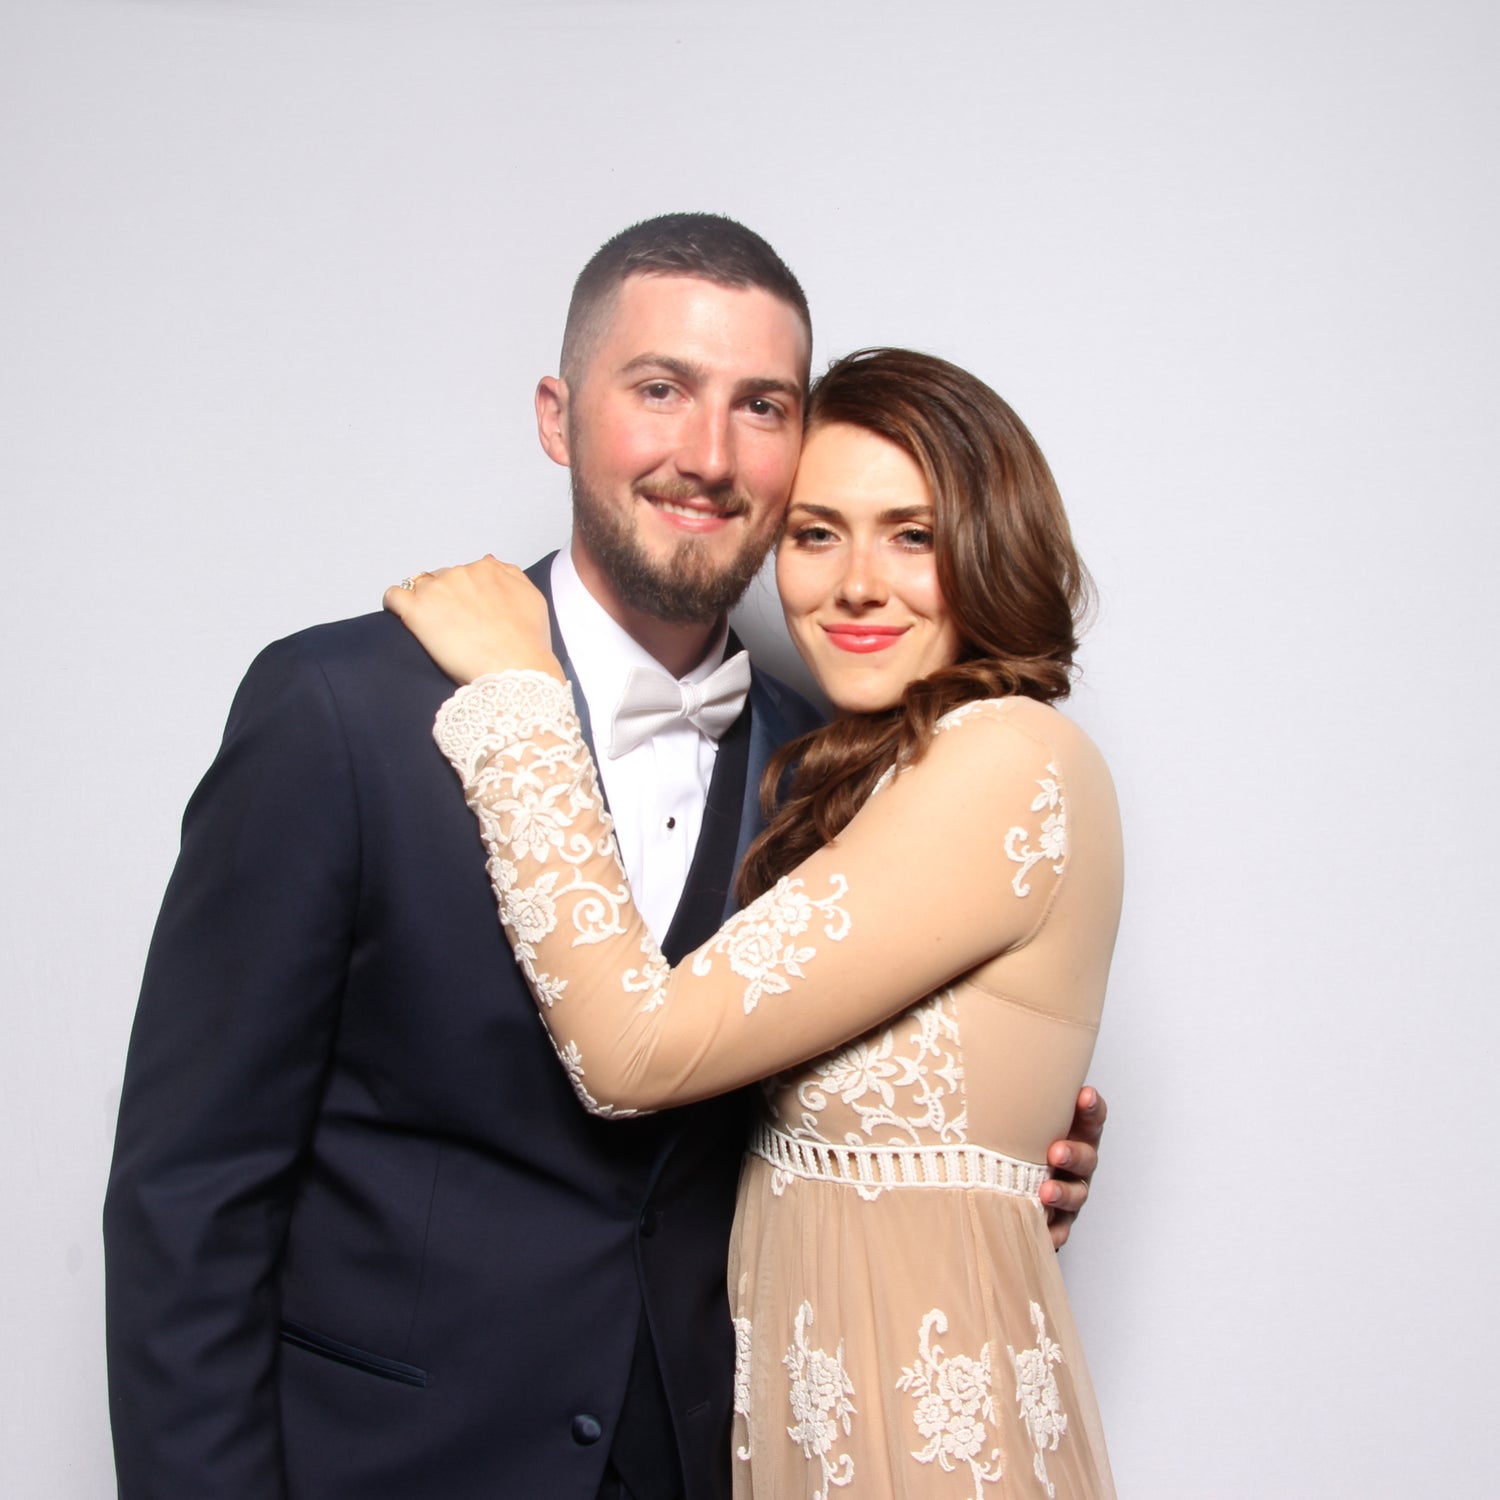 Groom and Bride pose in a photo booth at their wedding